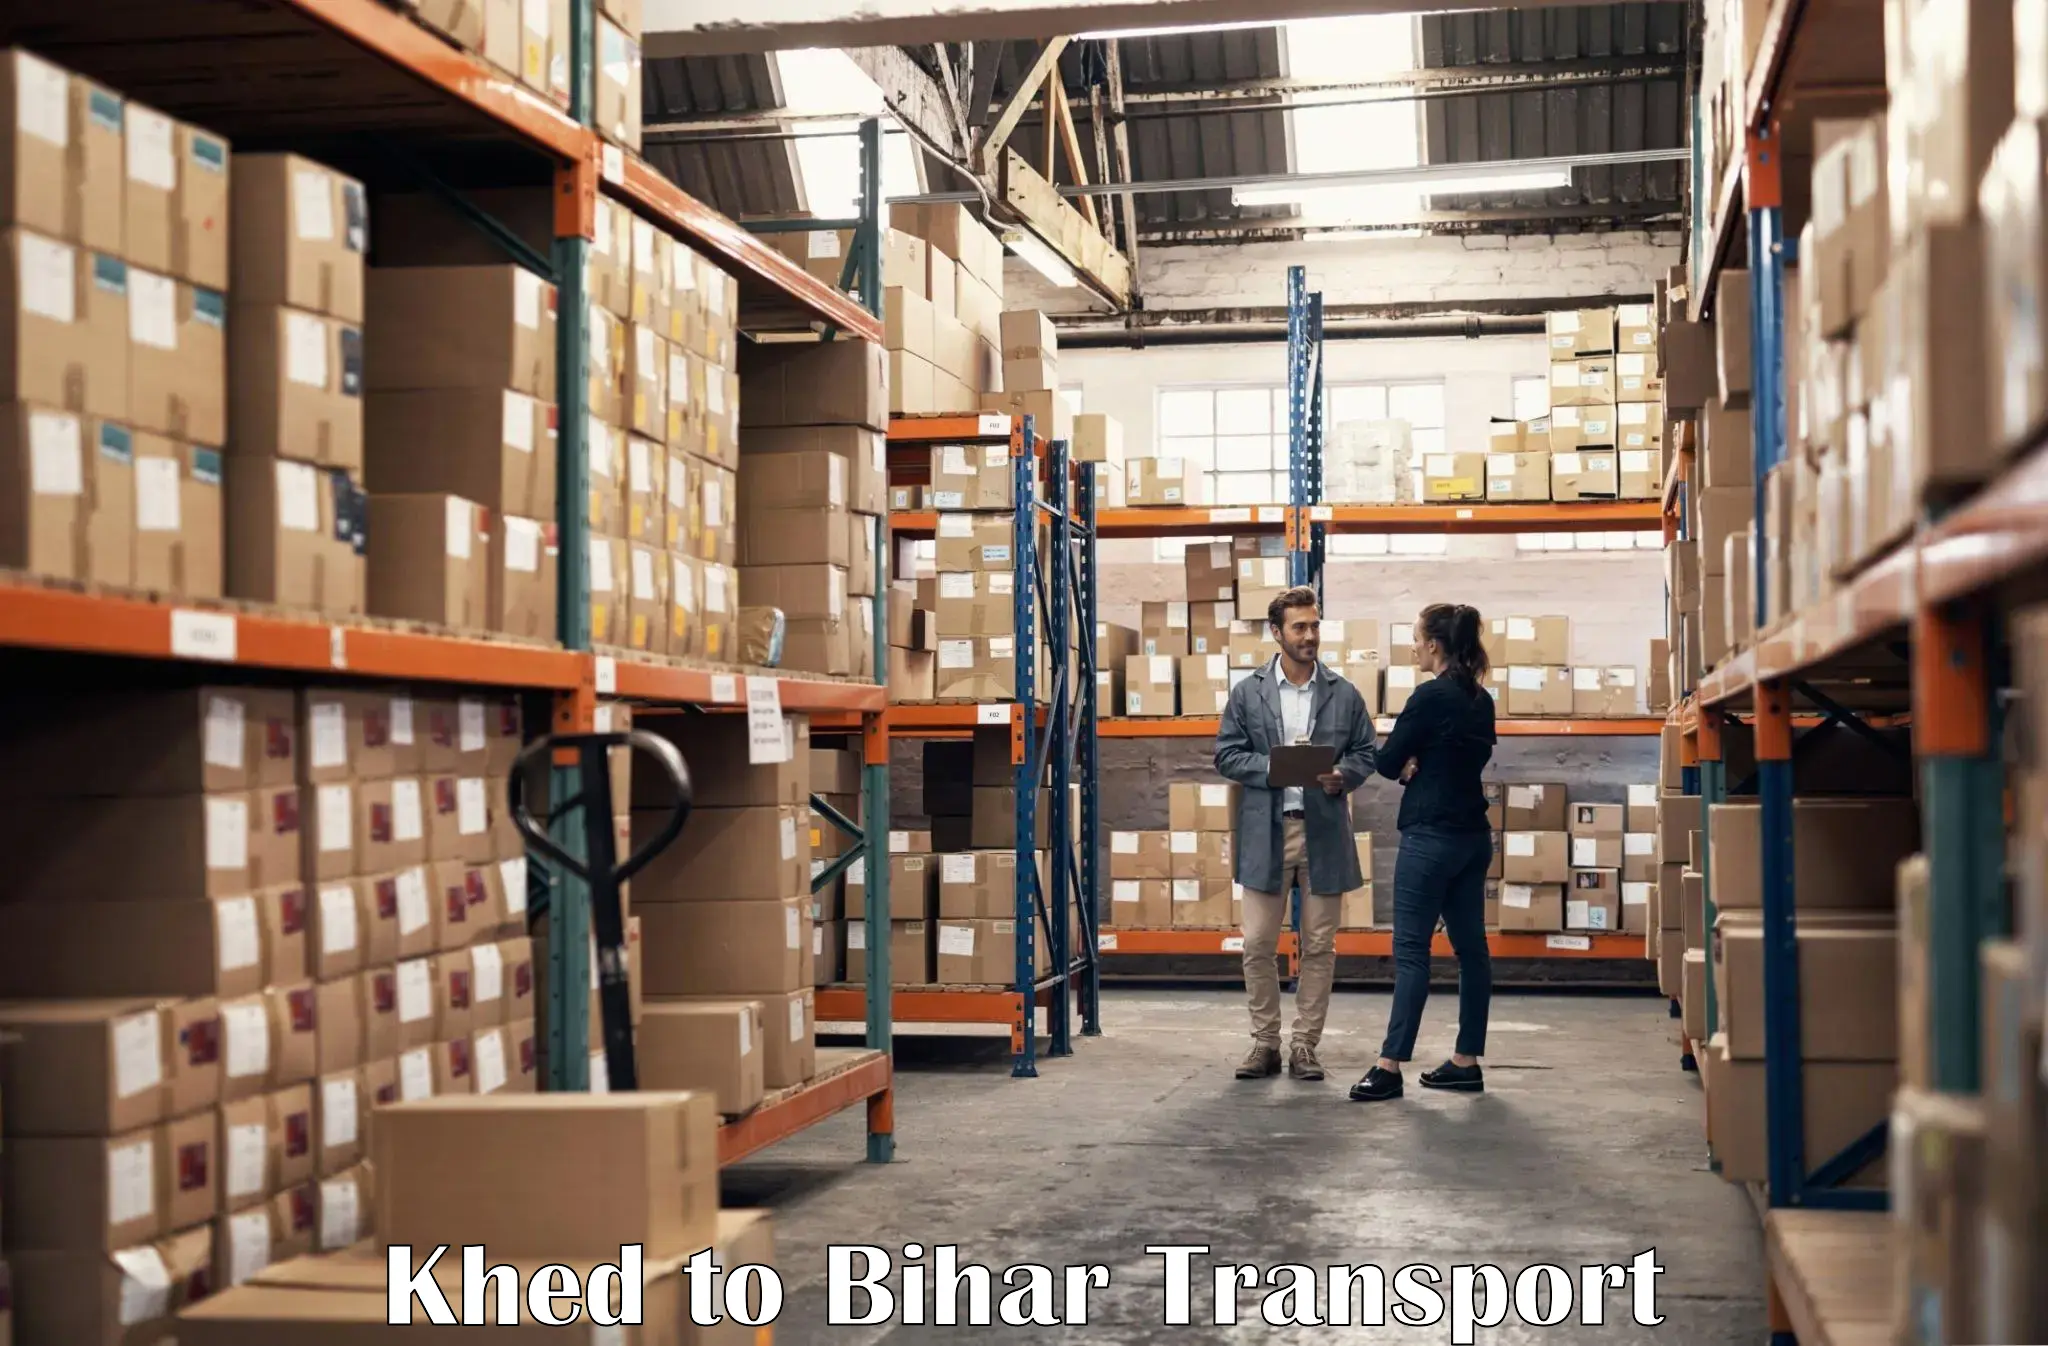 Truck transport companies in India in Khed to Bihar